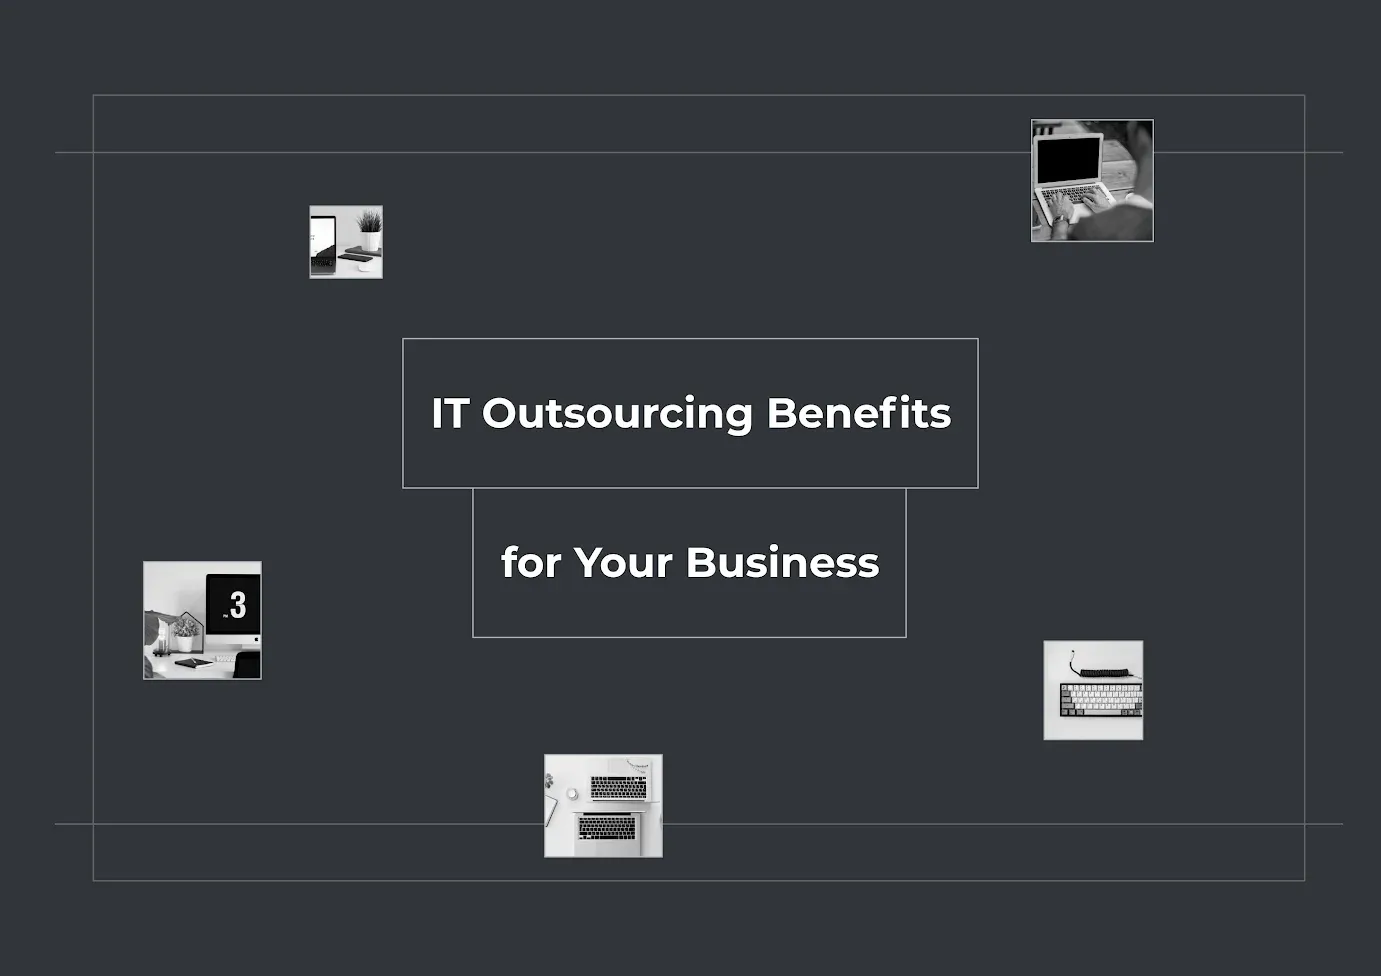 IT Outsourcing Benefits for Your Business